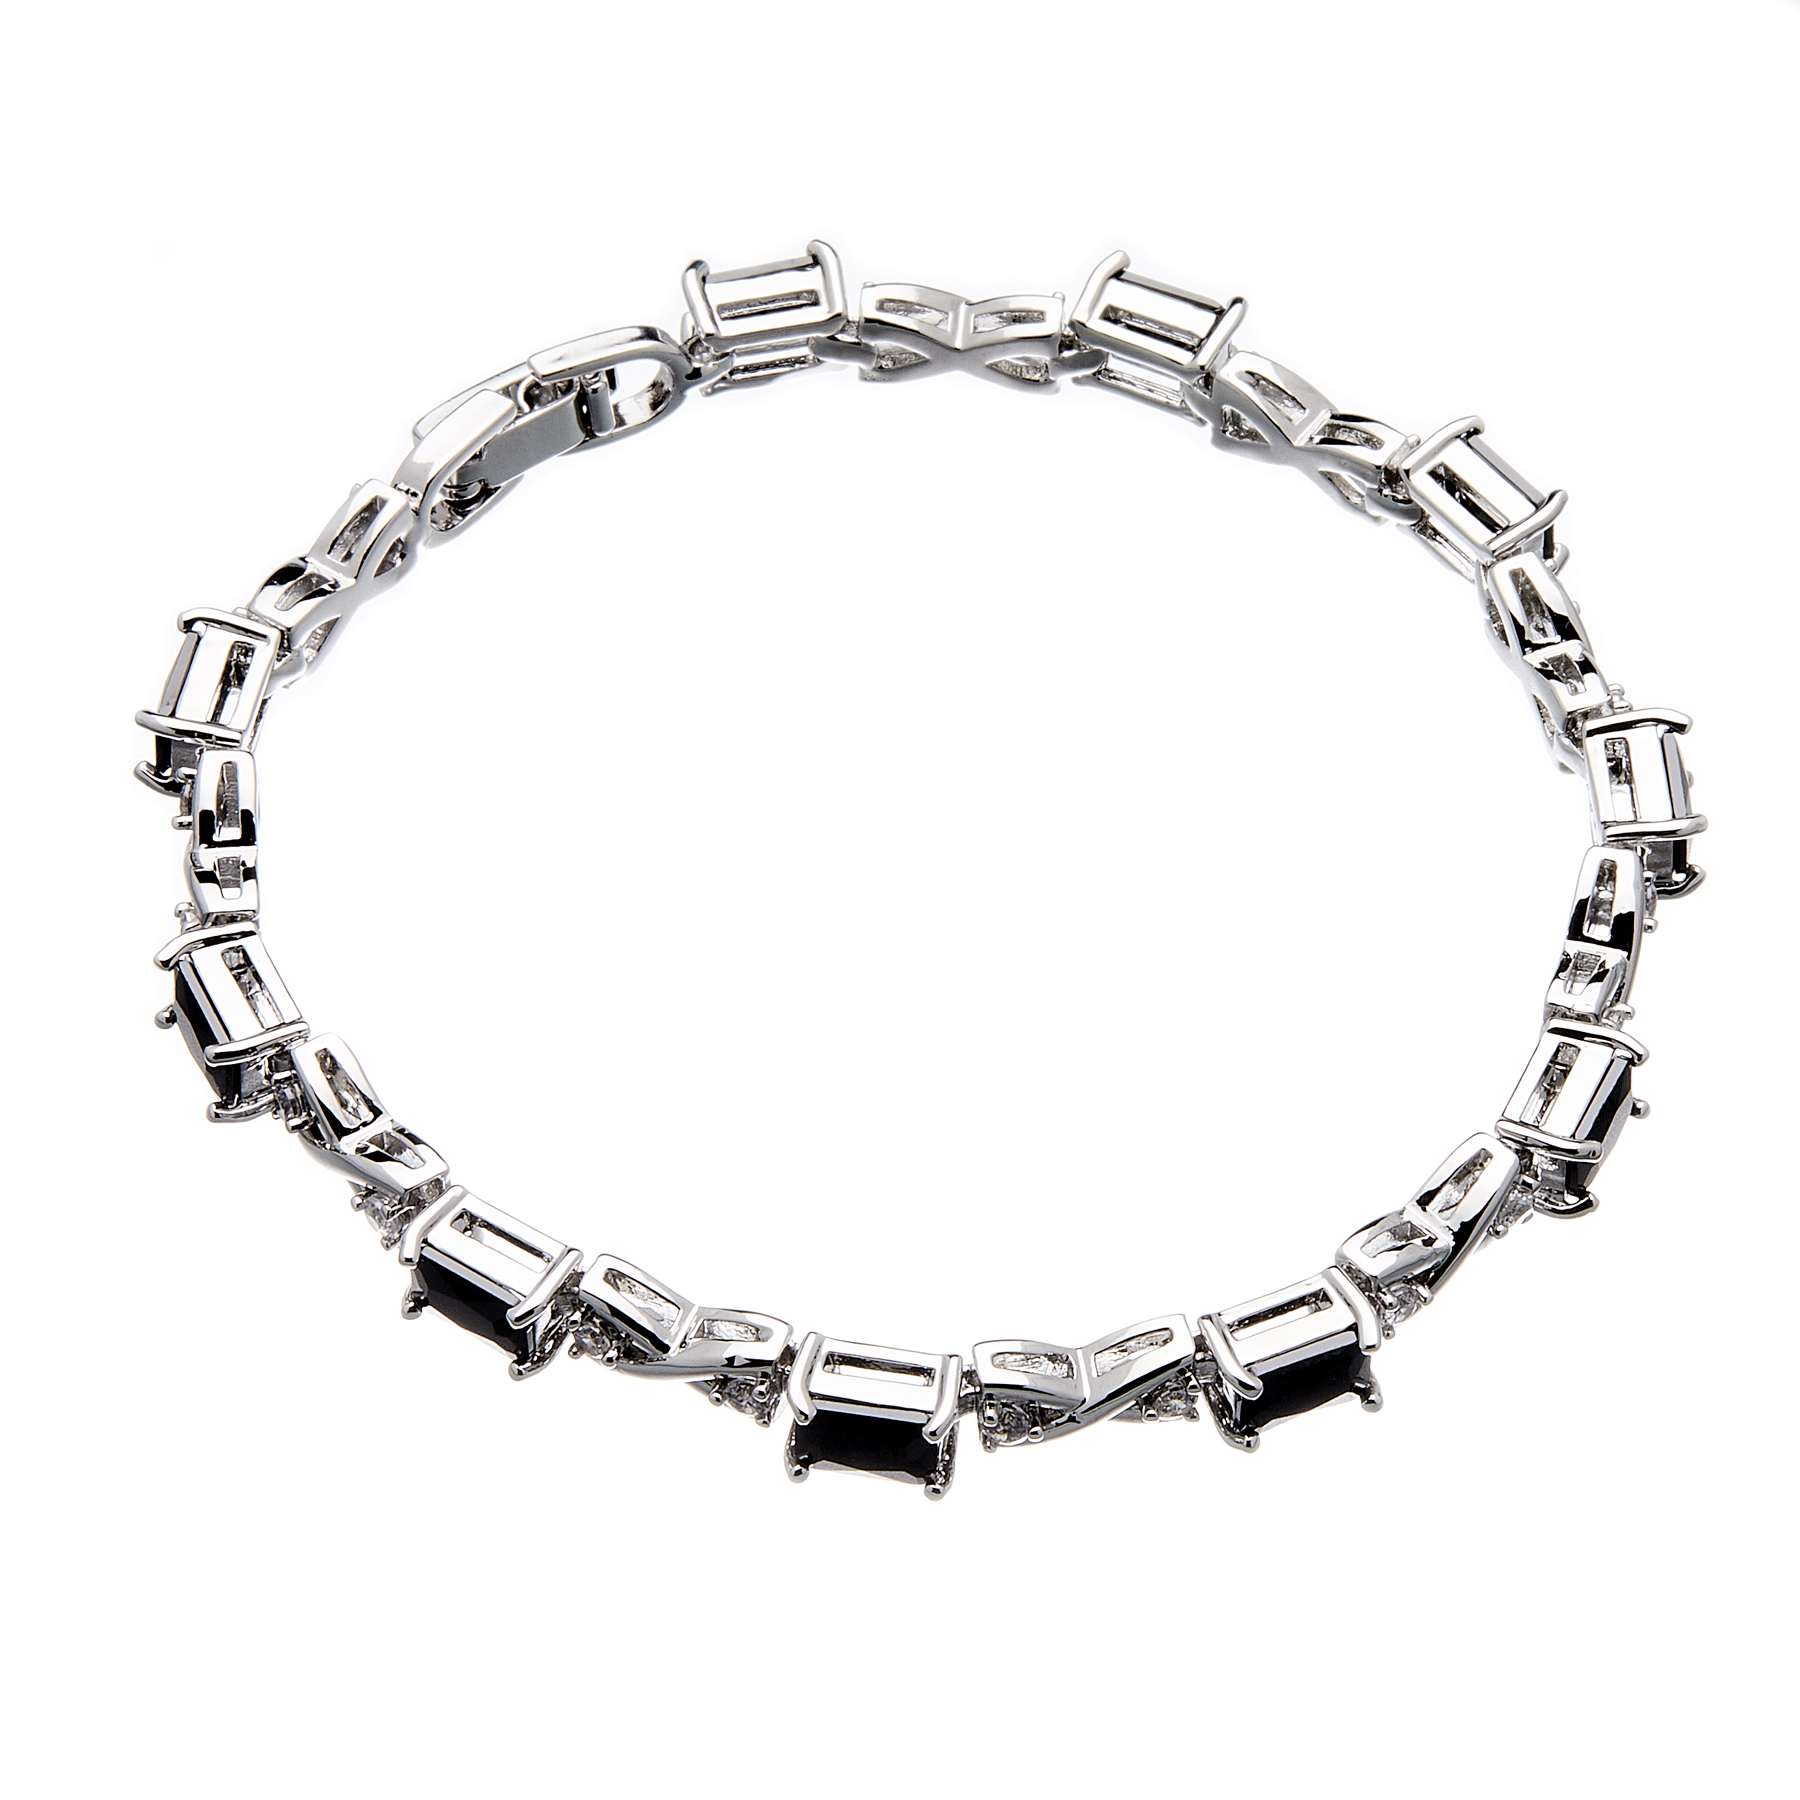 Bracelet - silver with black Cubic Zirconia Stones and clear crystals - Nasnan